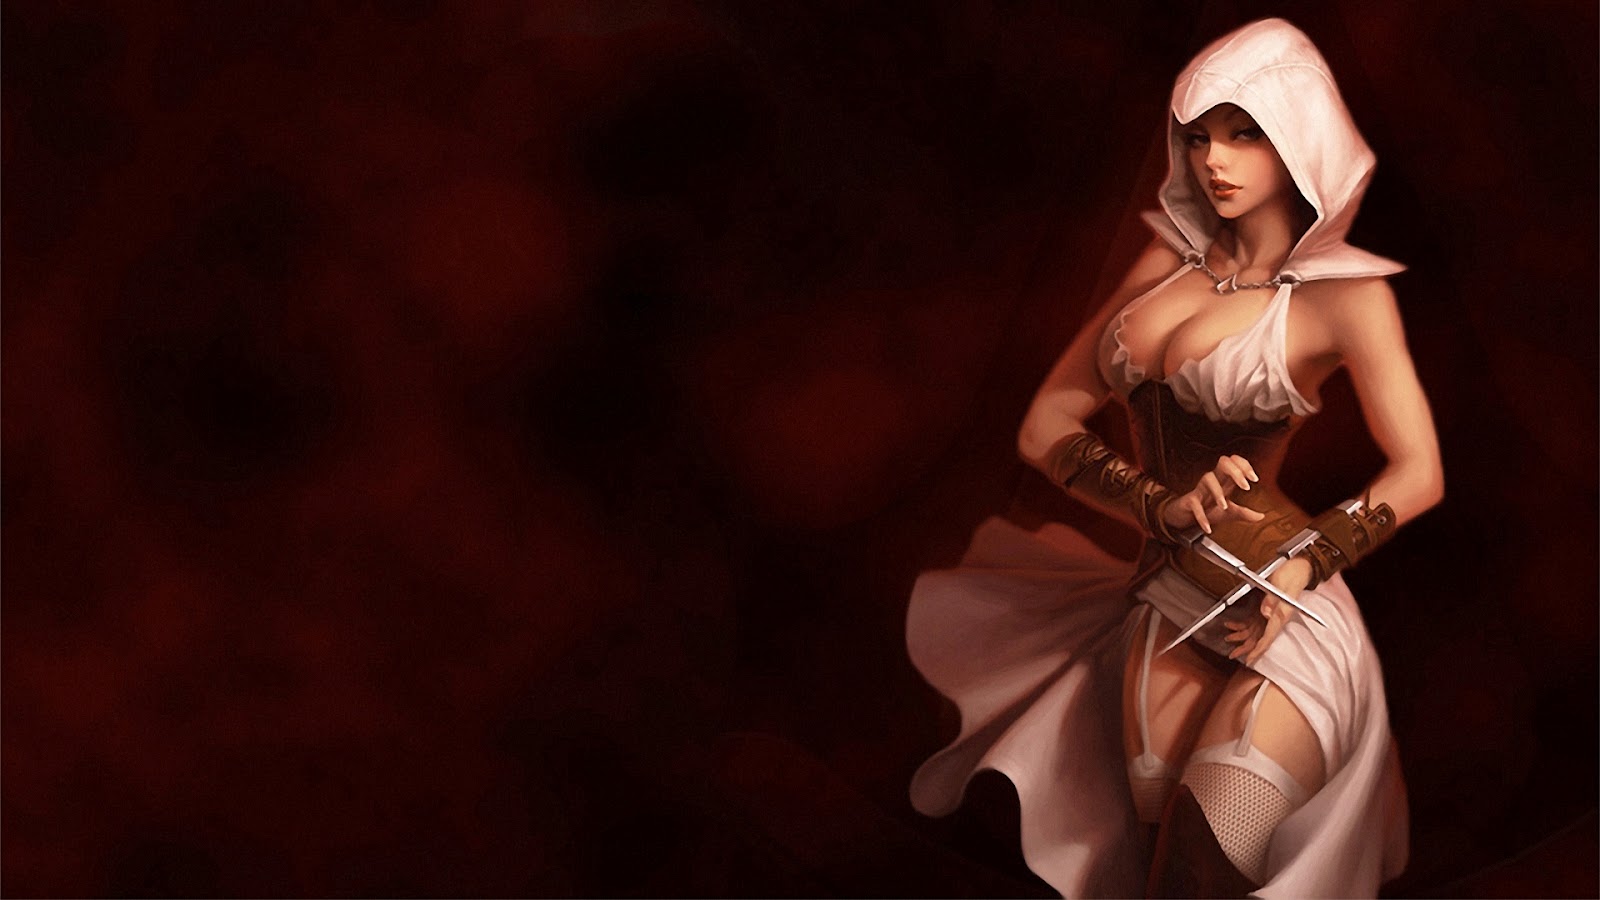 Sexy Assassin Girl Female S Creed Wallpaper Background